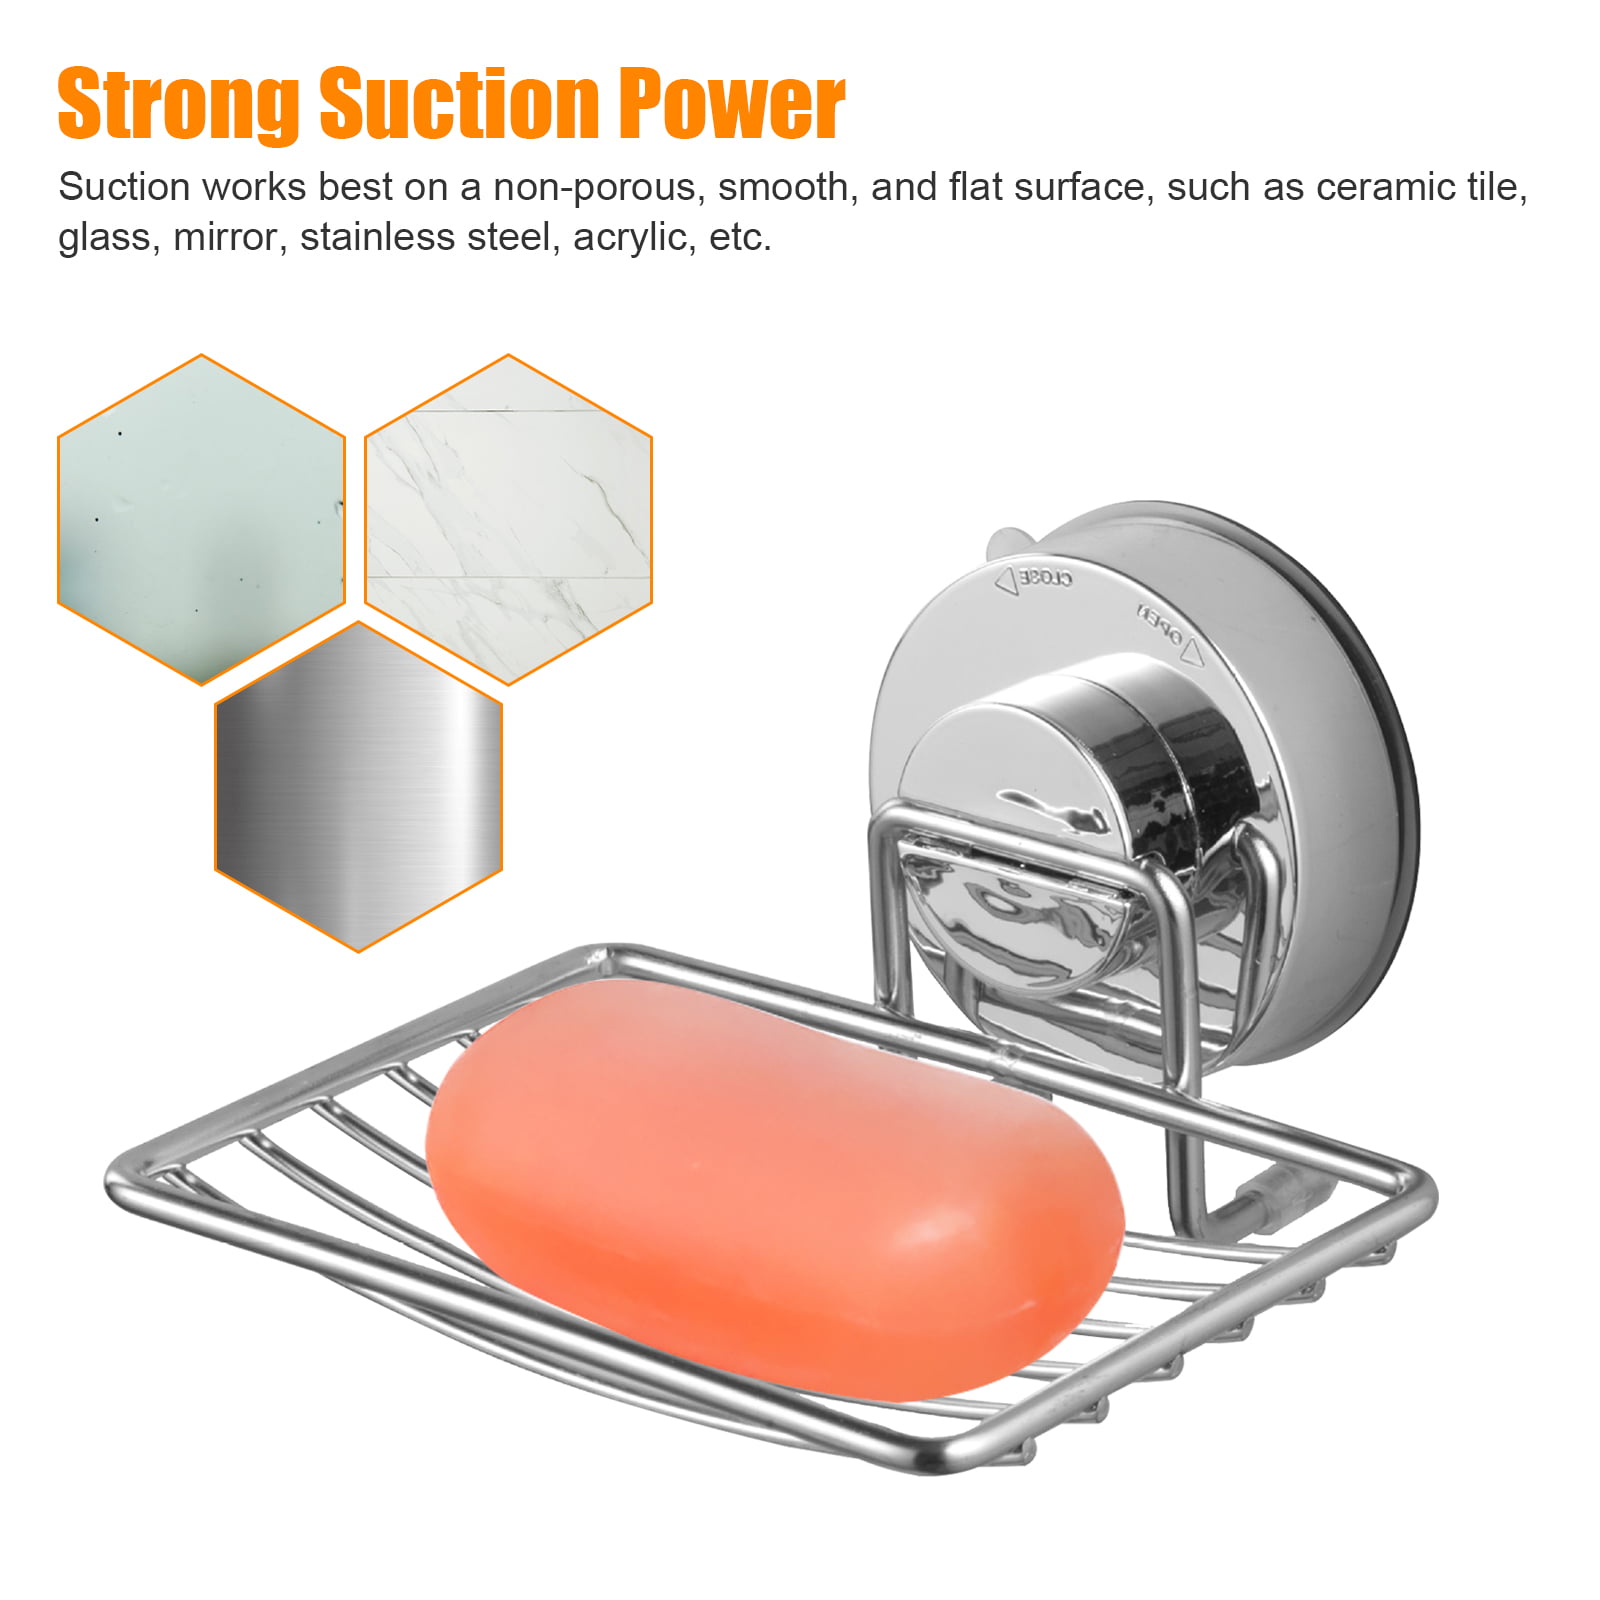 Stainless Steel Rustproof Soap Dish Corner Suction Cup Shower And Kitchen Holder 